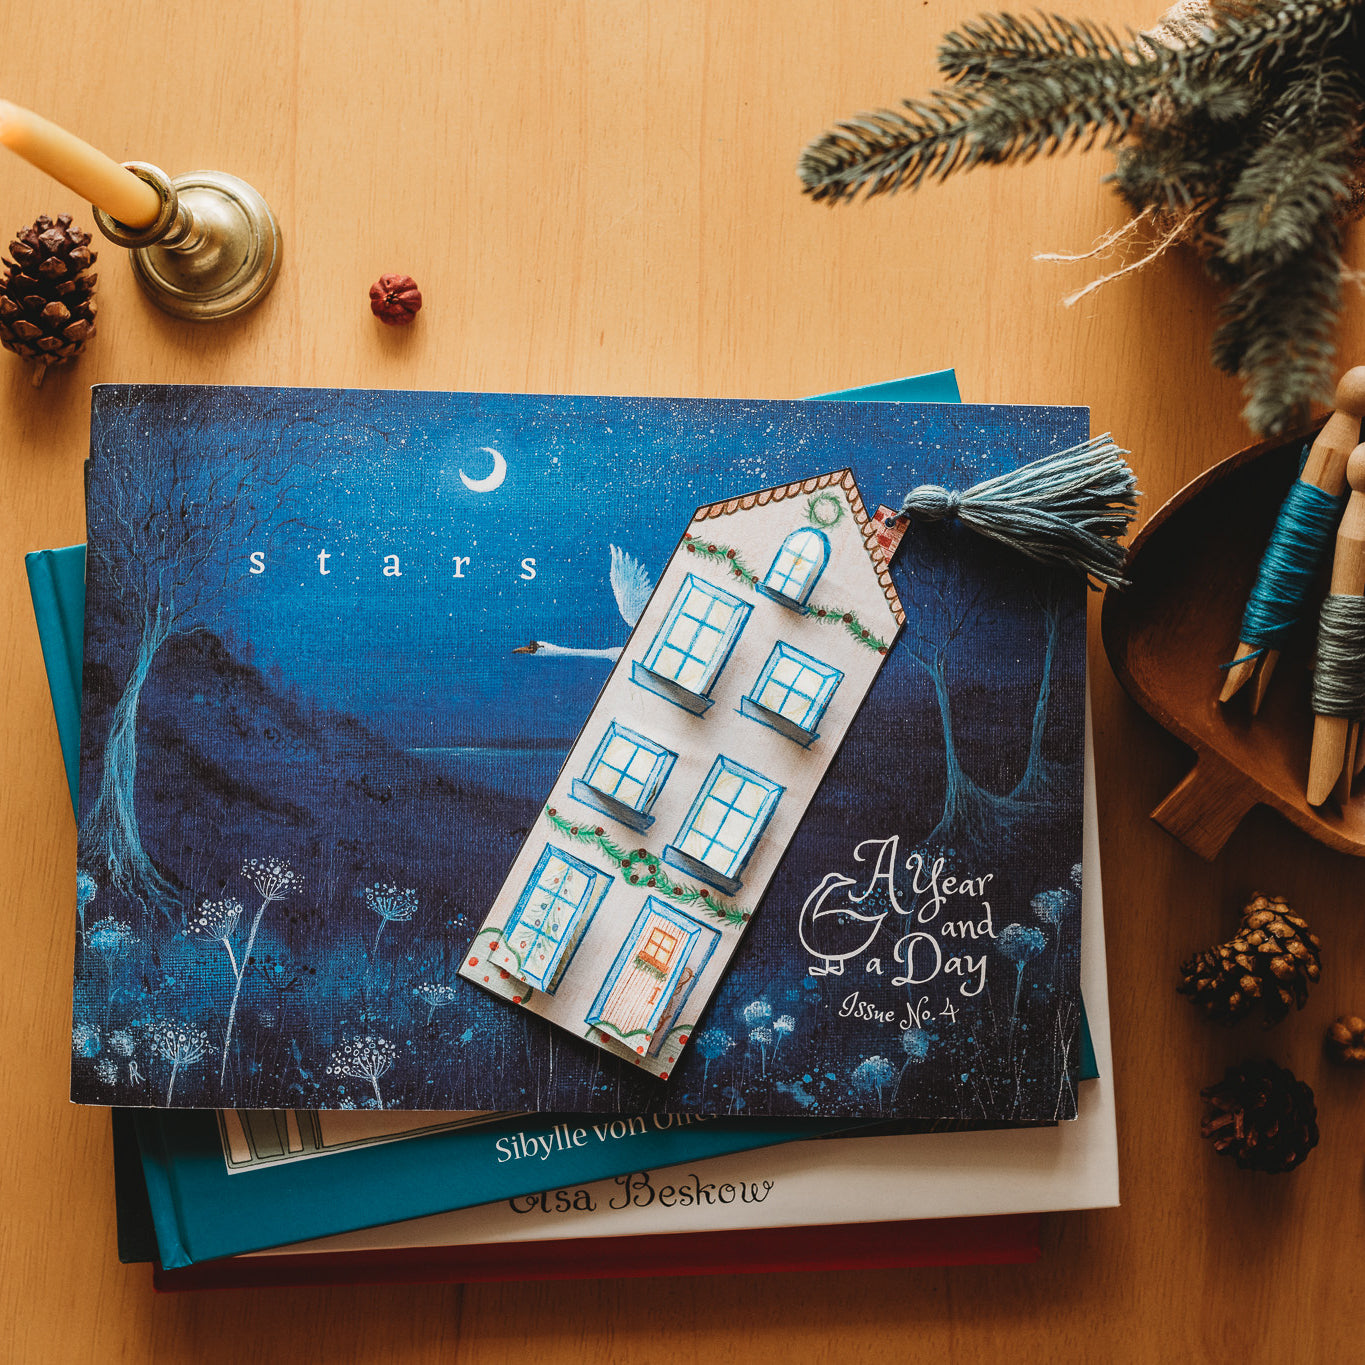 A cozy bookmark sits on a blue book.